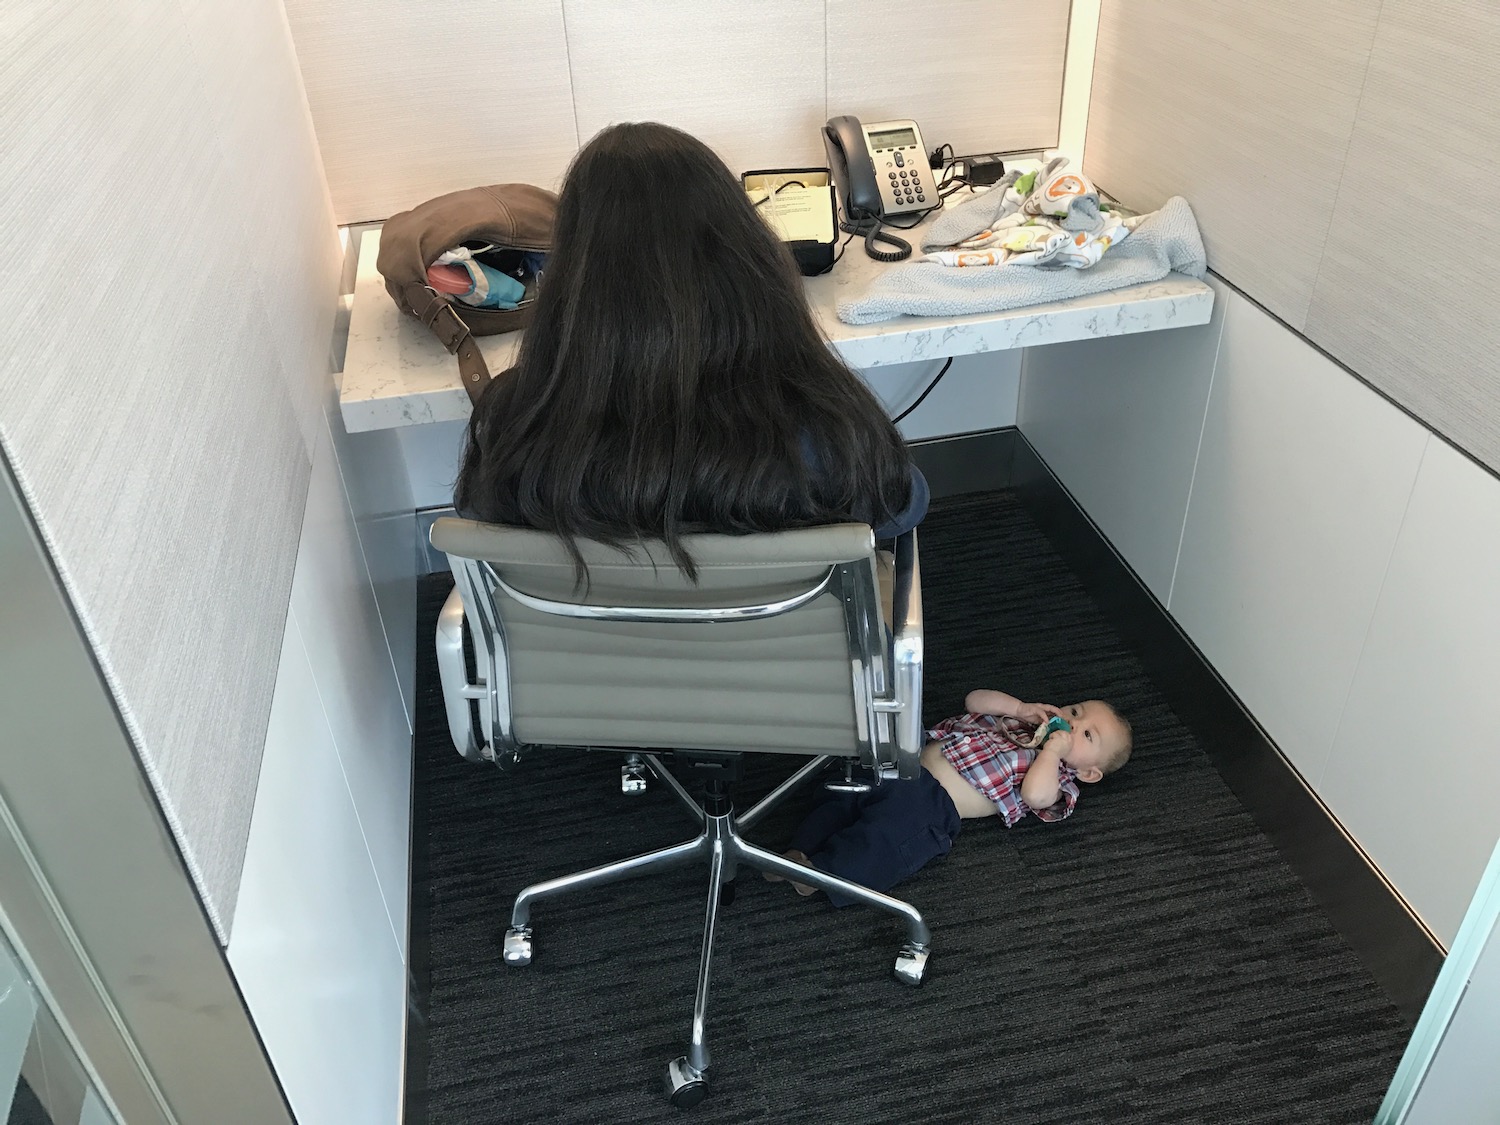 a woman sitting in a chair with a baby lying on the floor